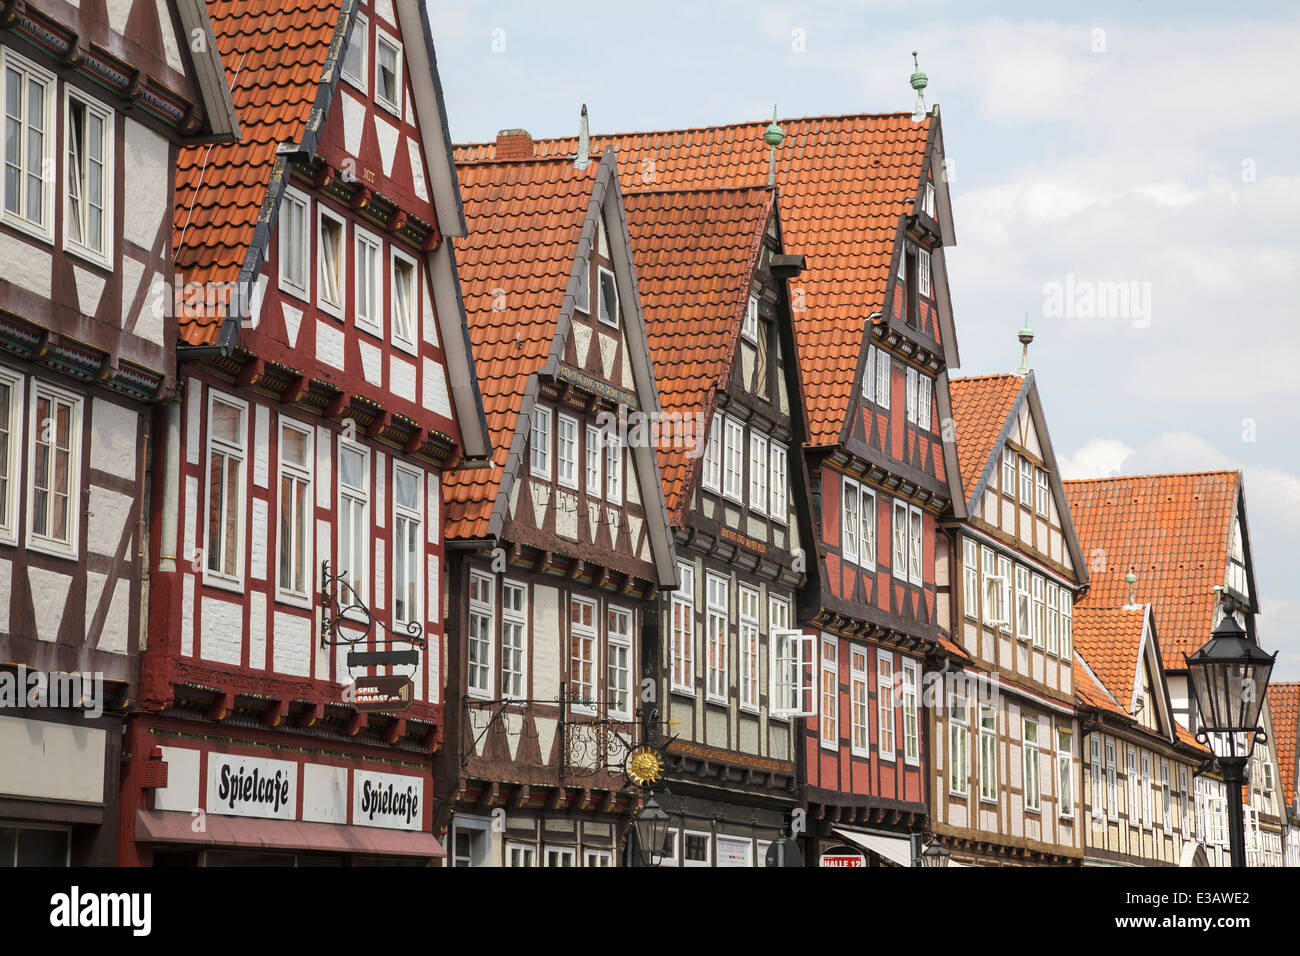 timber frame buildings on Schuhstrasse, Celle, Lower Saxony, Germany Stock Photo